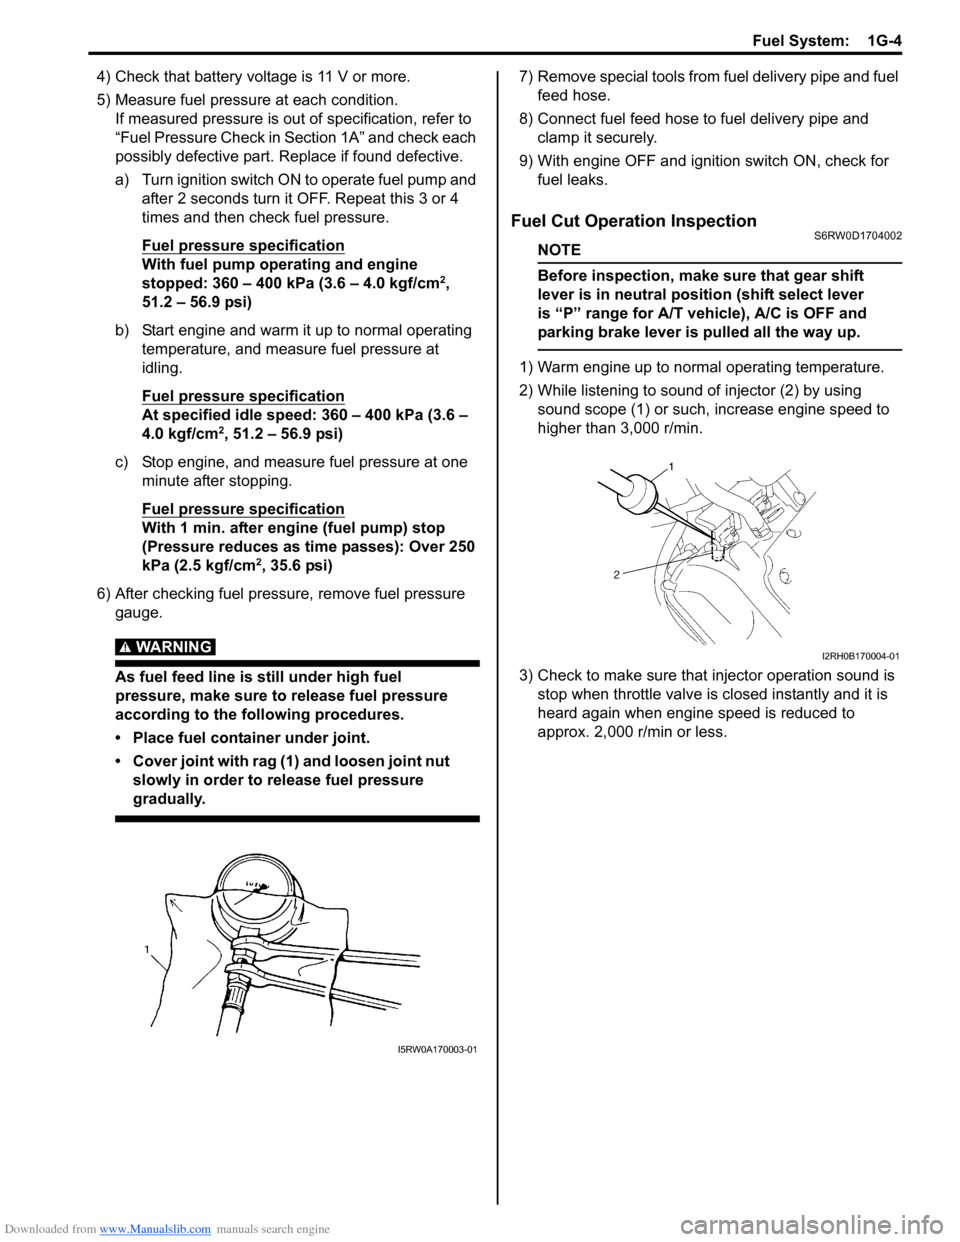 SUZUKI SX4 2006 1.G Service Workshop Manual Downloaded from www.Manualslib.com manuals search engine Fuel System:  1G-4
4) Check that battery voltage is 11 V or more.
5) Measure fuel pressure at each condition.
If measured pressure is out of sp